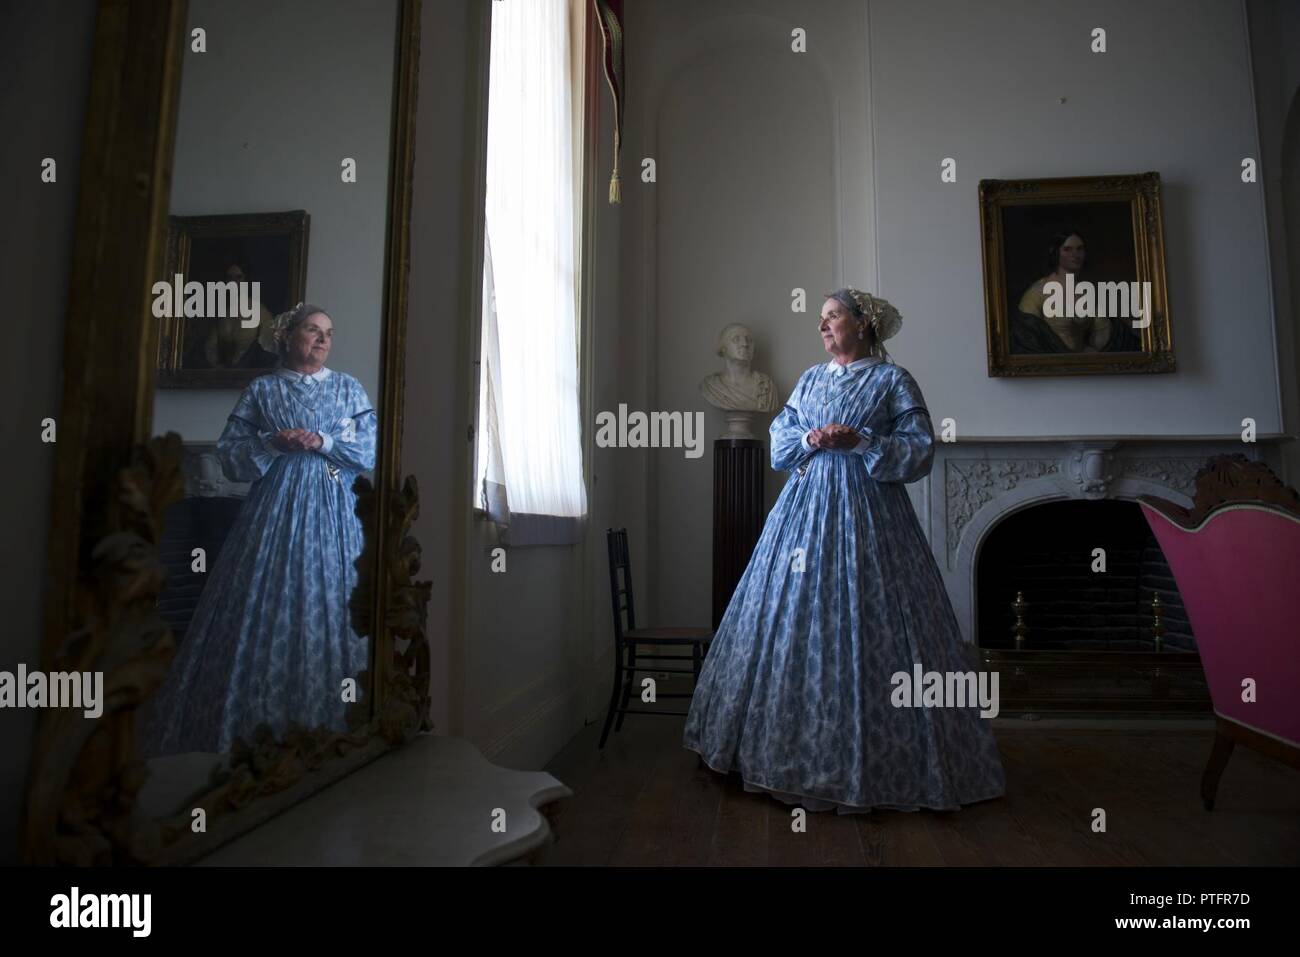 Docent volunteer, Roberta 'Bobbie' Jones, stands in the White Parlor room of the Arlington House, a Robert E. Lee Memorial, in Arlington National Cemetery, Arlington, Va., July 19, 2017.  In July of 2015, philanthropist David M. Rubinstein announced a $12.35 million donation to the National Park Foundation’s Centennial Campaign for America’s National Parks to restore and improve access to Arlington House.  This work is scheduled to begin in late August 2017, limiting access to visitors. Stock Photo